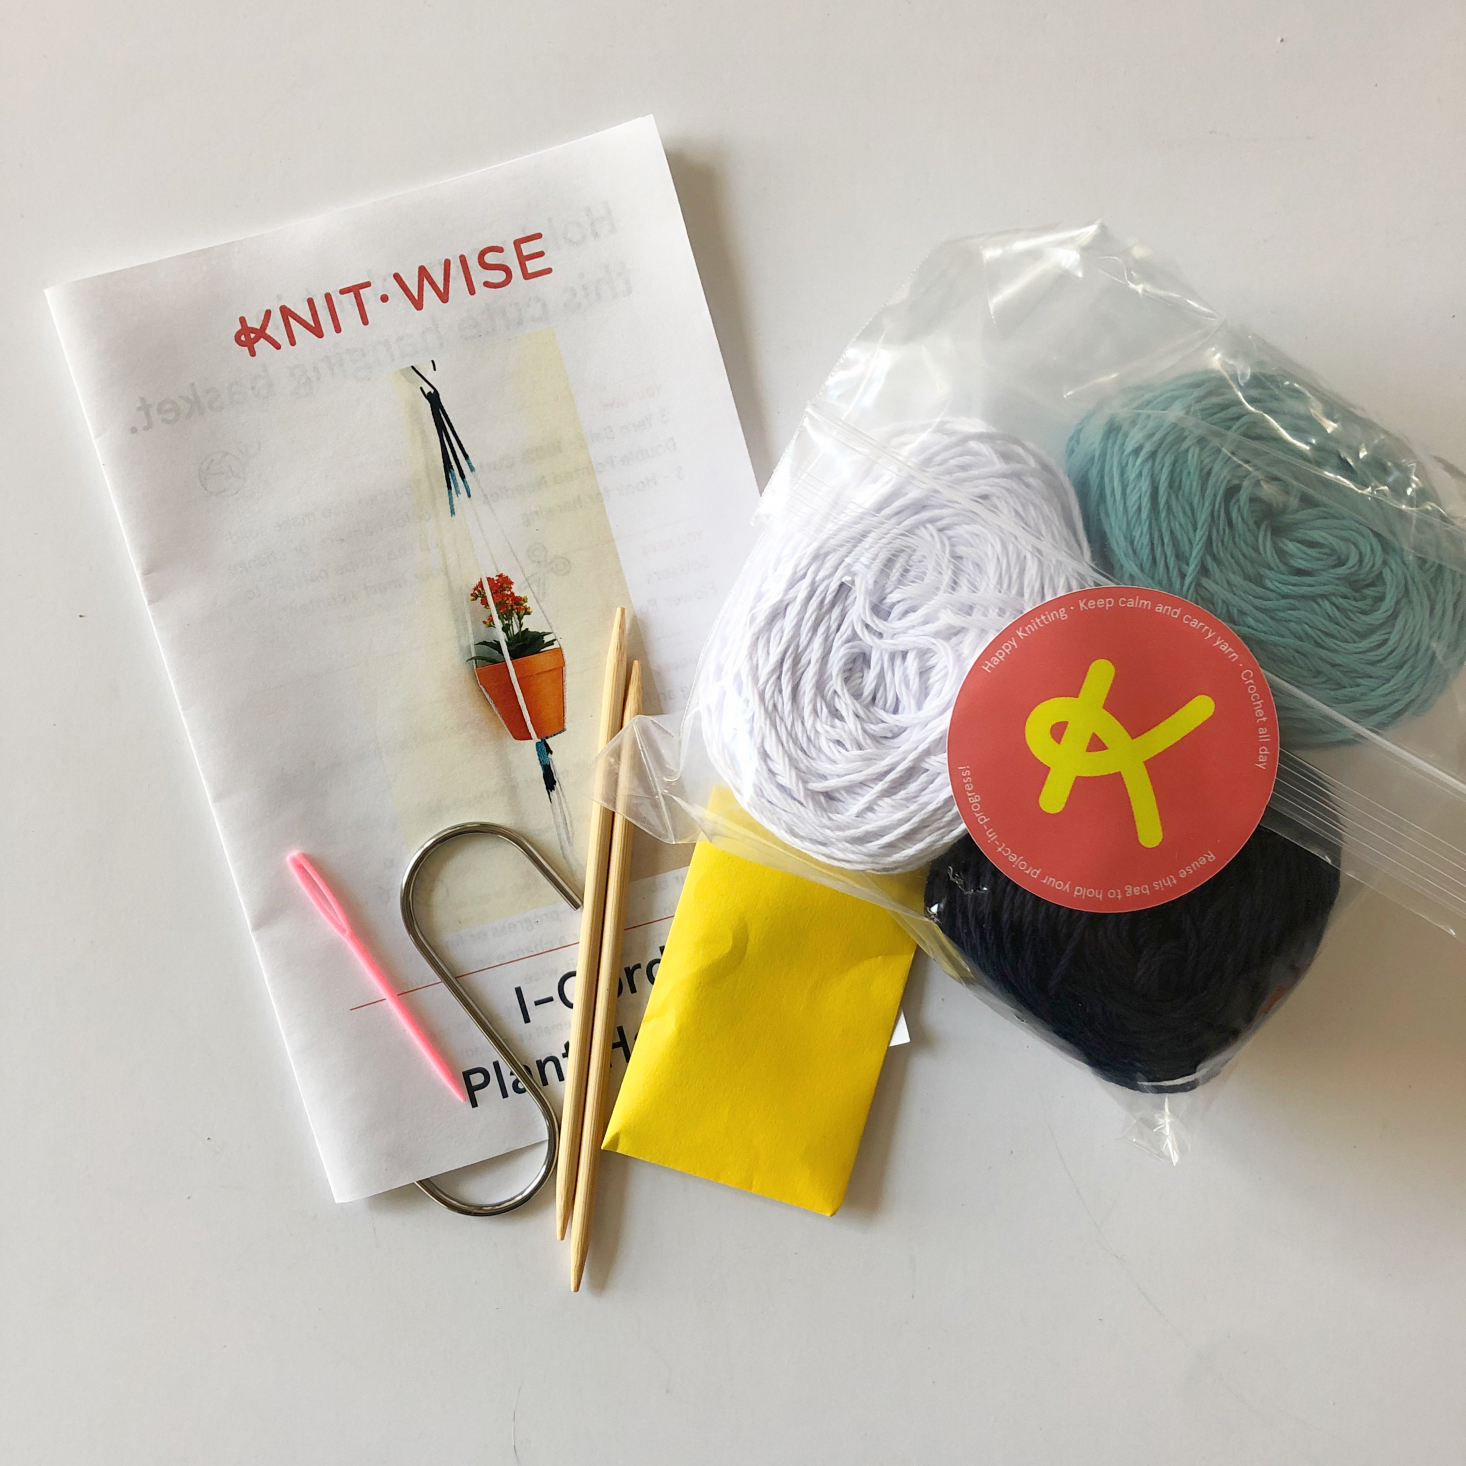 Knit-Wise Yarn Subscription Review + Coupon – May 2019